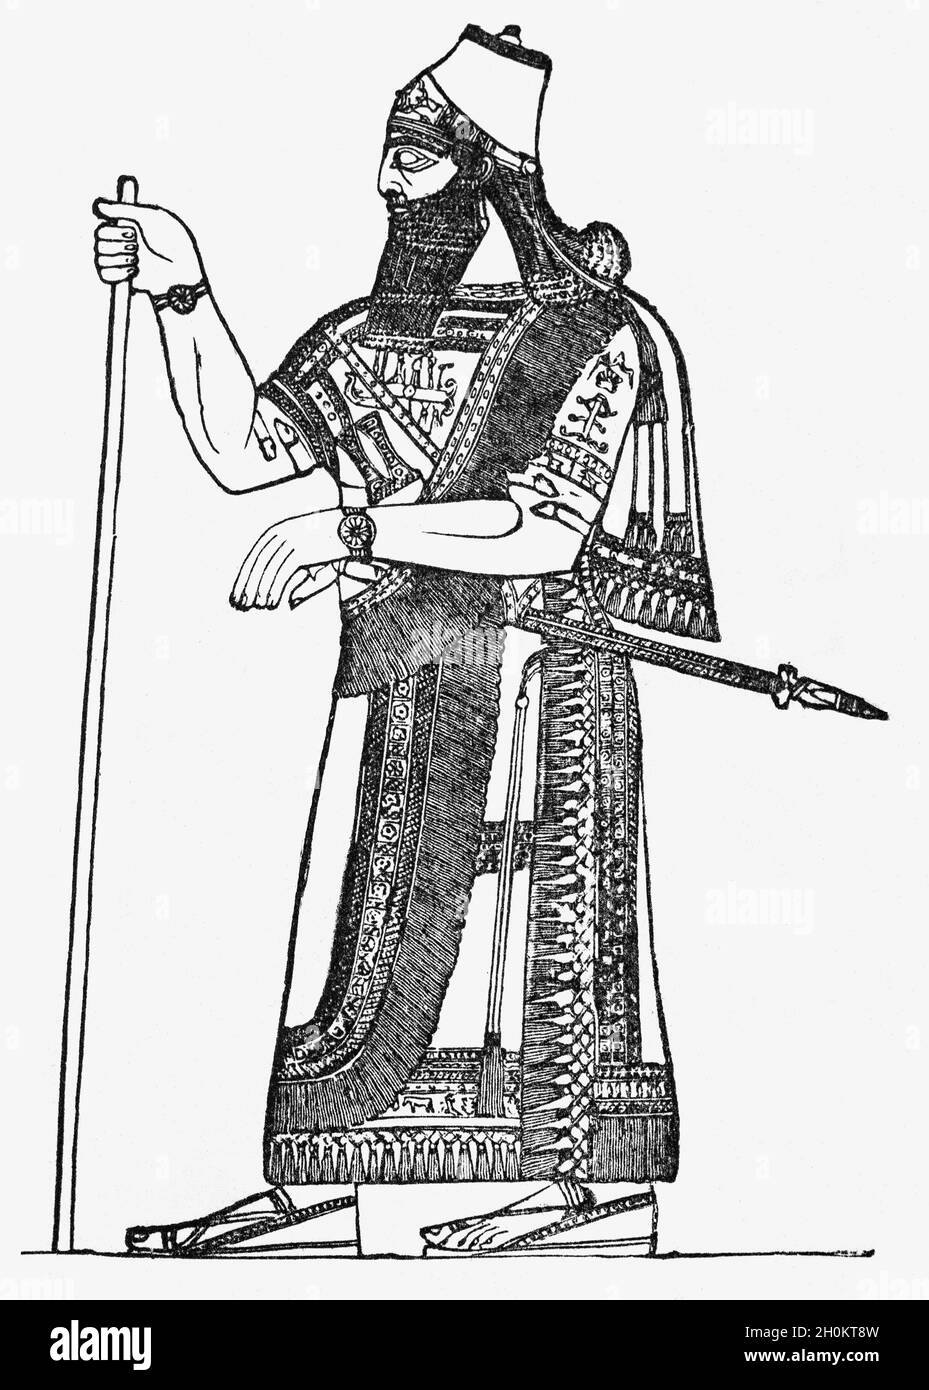 A late 19th Century portrait of King Sargon, King of Assyria and the first person in recorded history to create an empire or multi-ethnic state. His empire encompassed the region of the Tigris and Euphrates rivers, and part of what is present-day Turkey. He was the founder of Mesopotamian military traditions and during his reign of 56 years, invaded all the cities in the Middle East and as far as the Arabian Gulf. Stock Photo